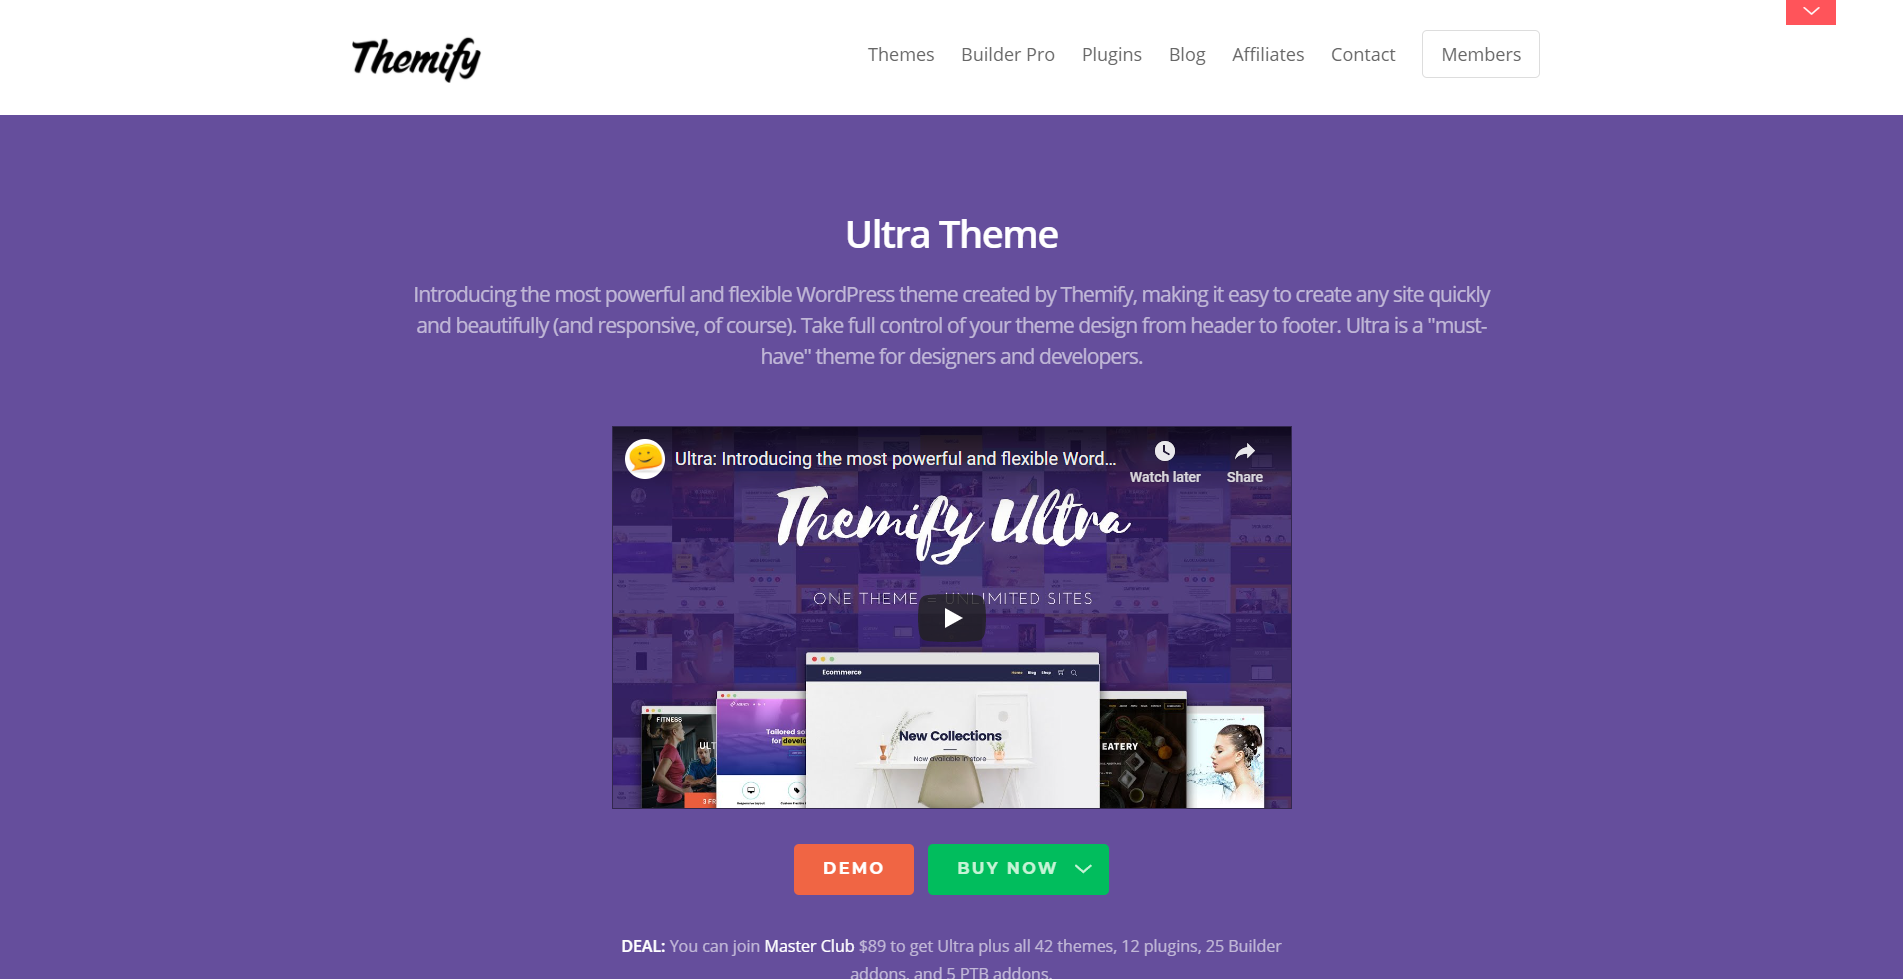 Themify Ultra homepage mobile-friendly theme